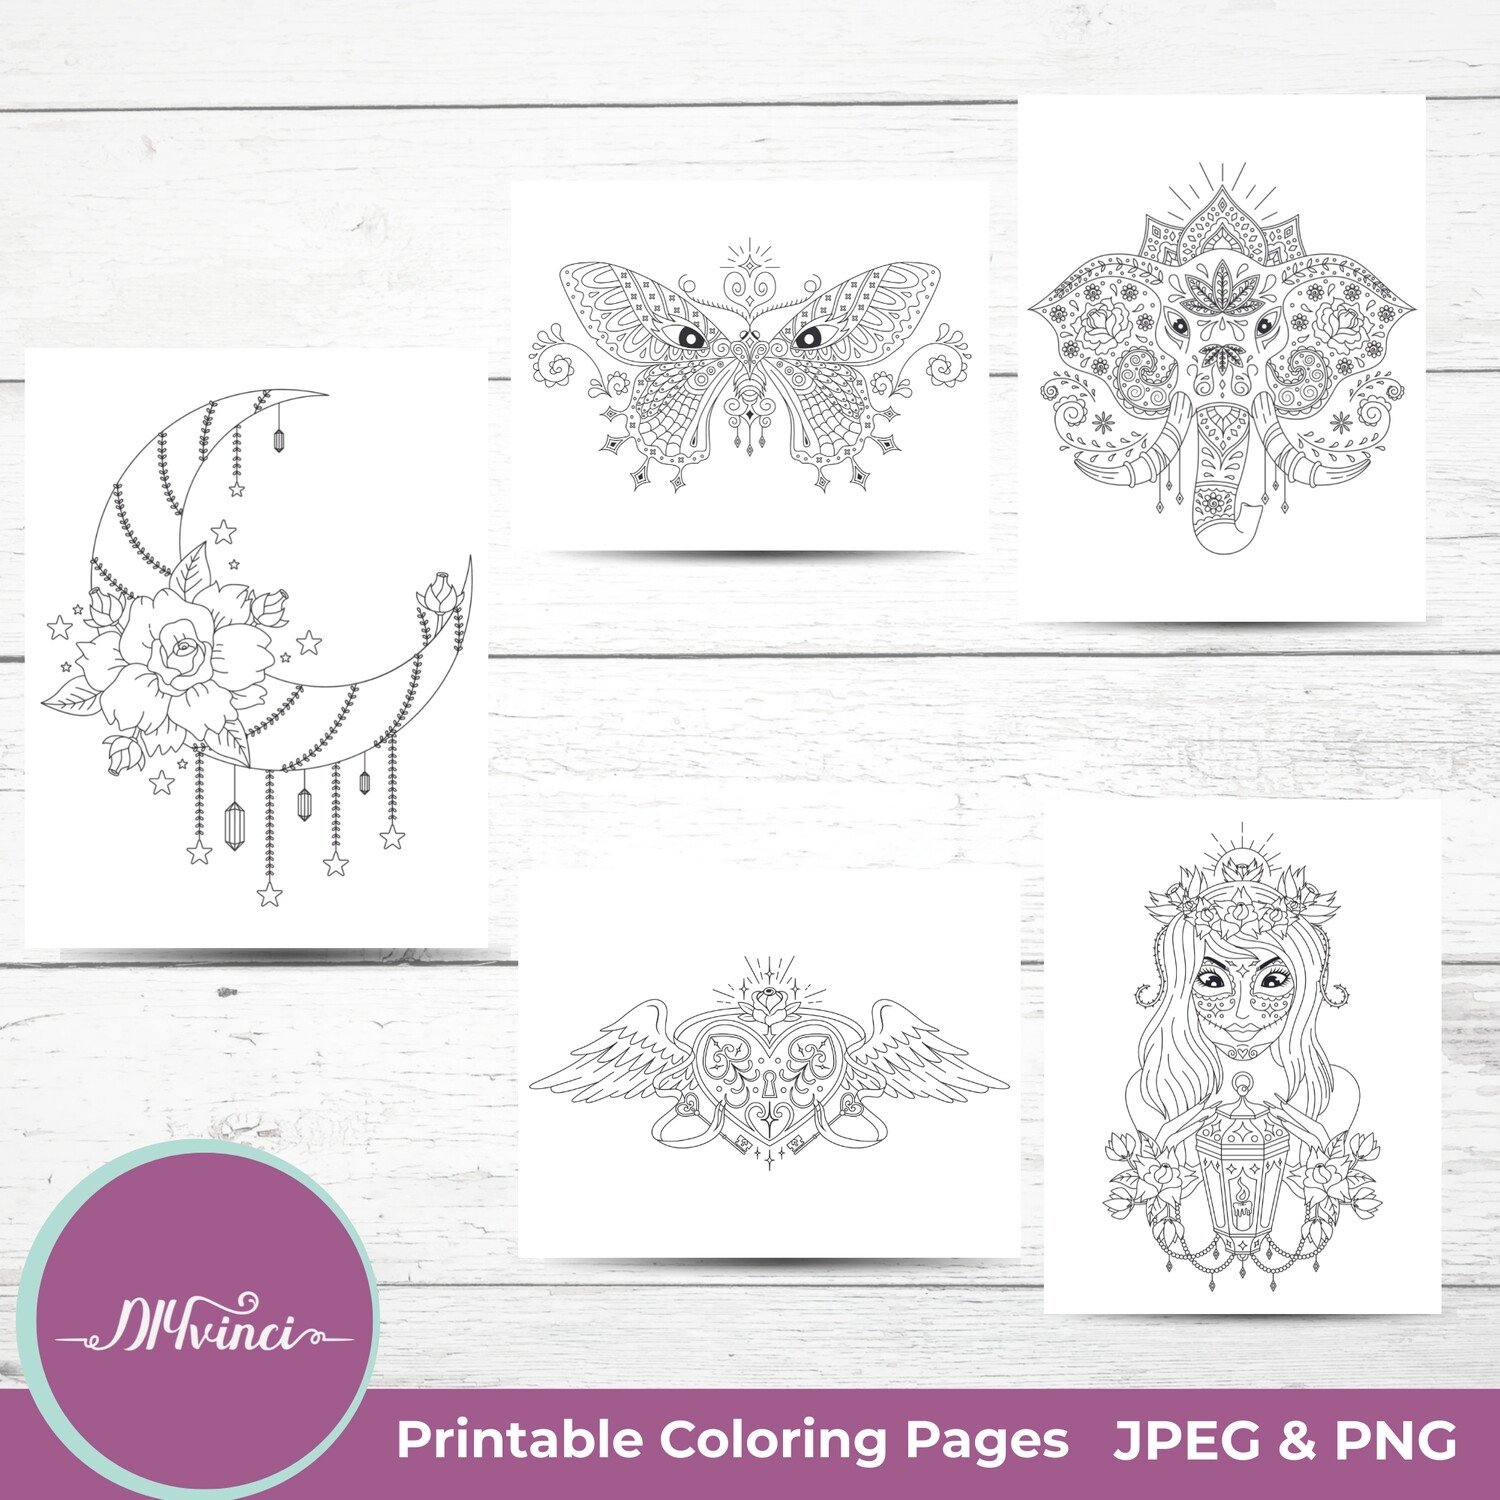 5 Tattoo Printable Coloring Pages - JPEG & PNG - Personal and Commercial Use